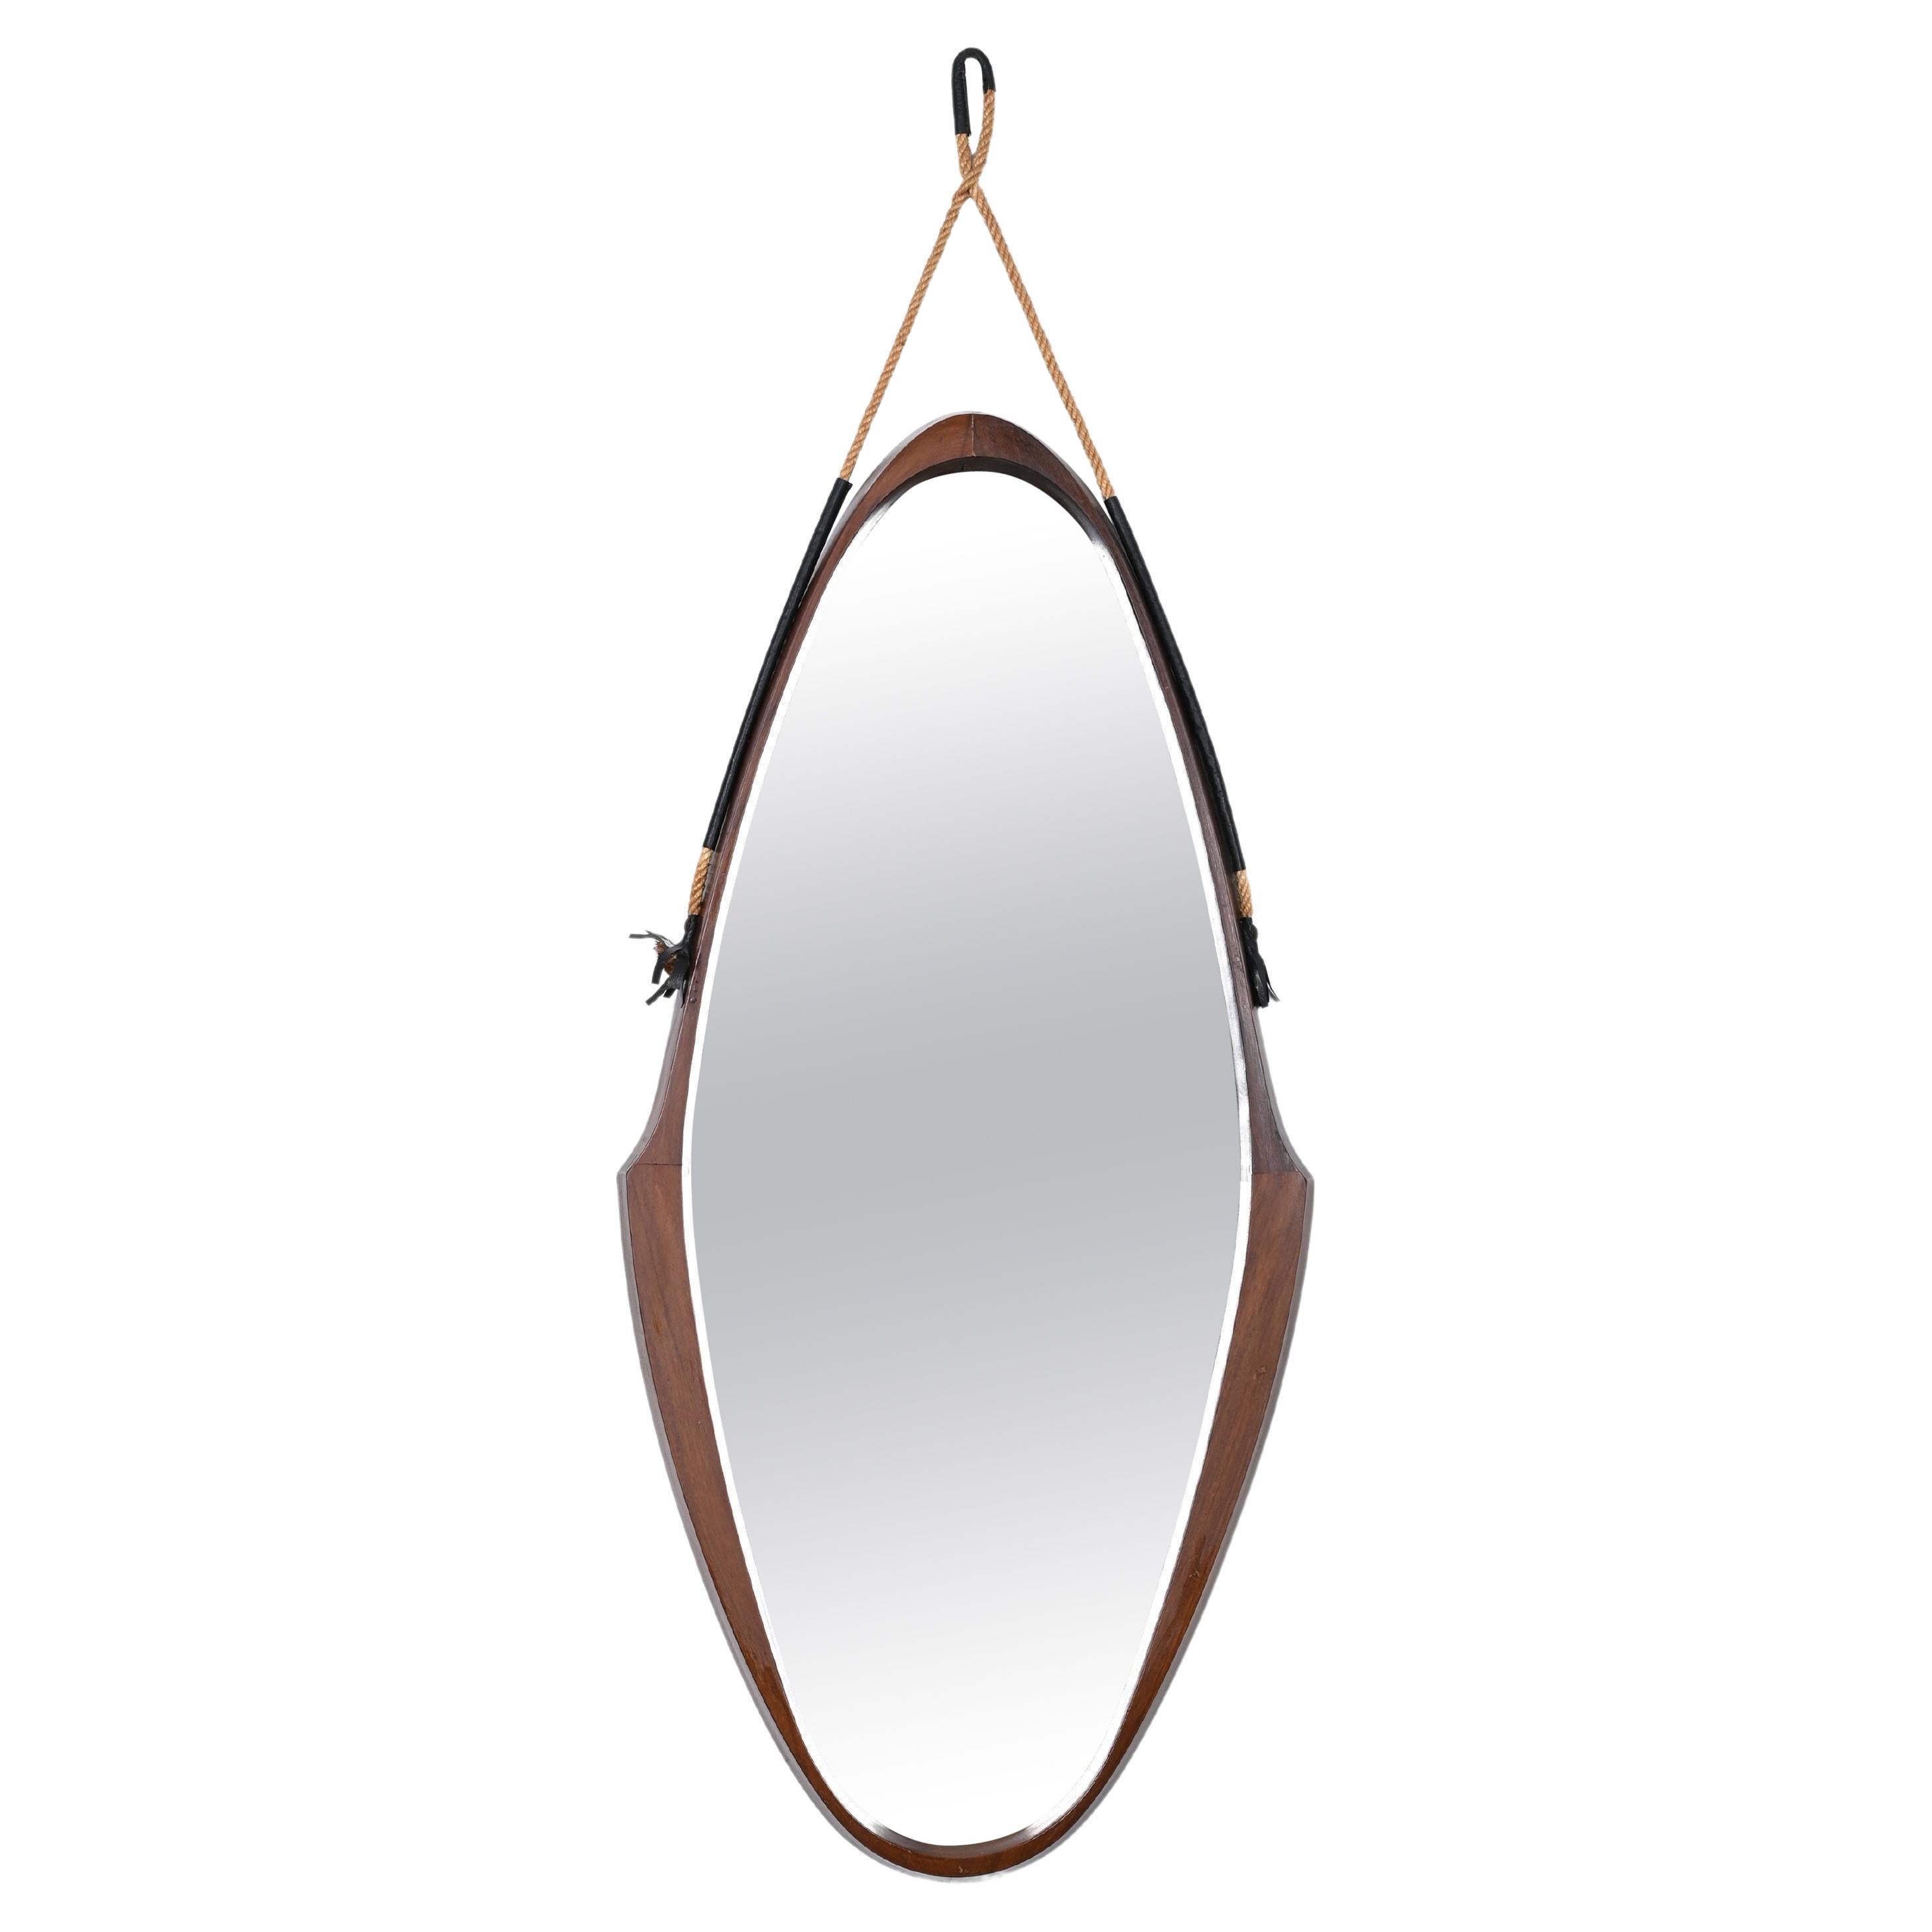 Midcentury Italian Oval Mirror In Curved Teak Rope And Leather 1960s At 1stdibs